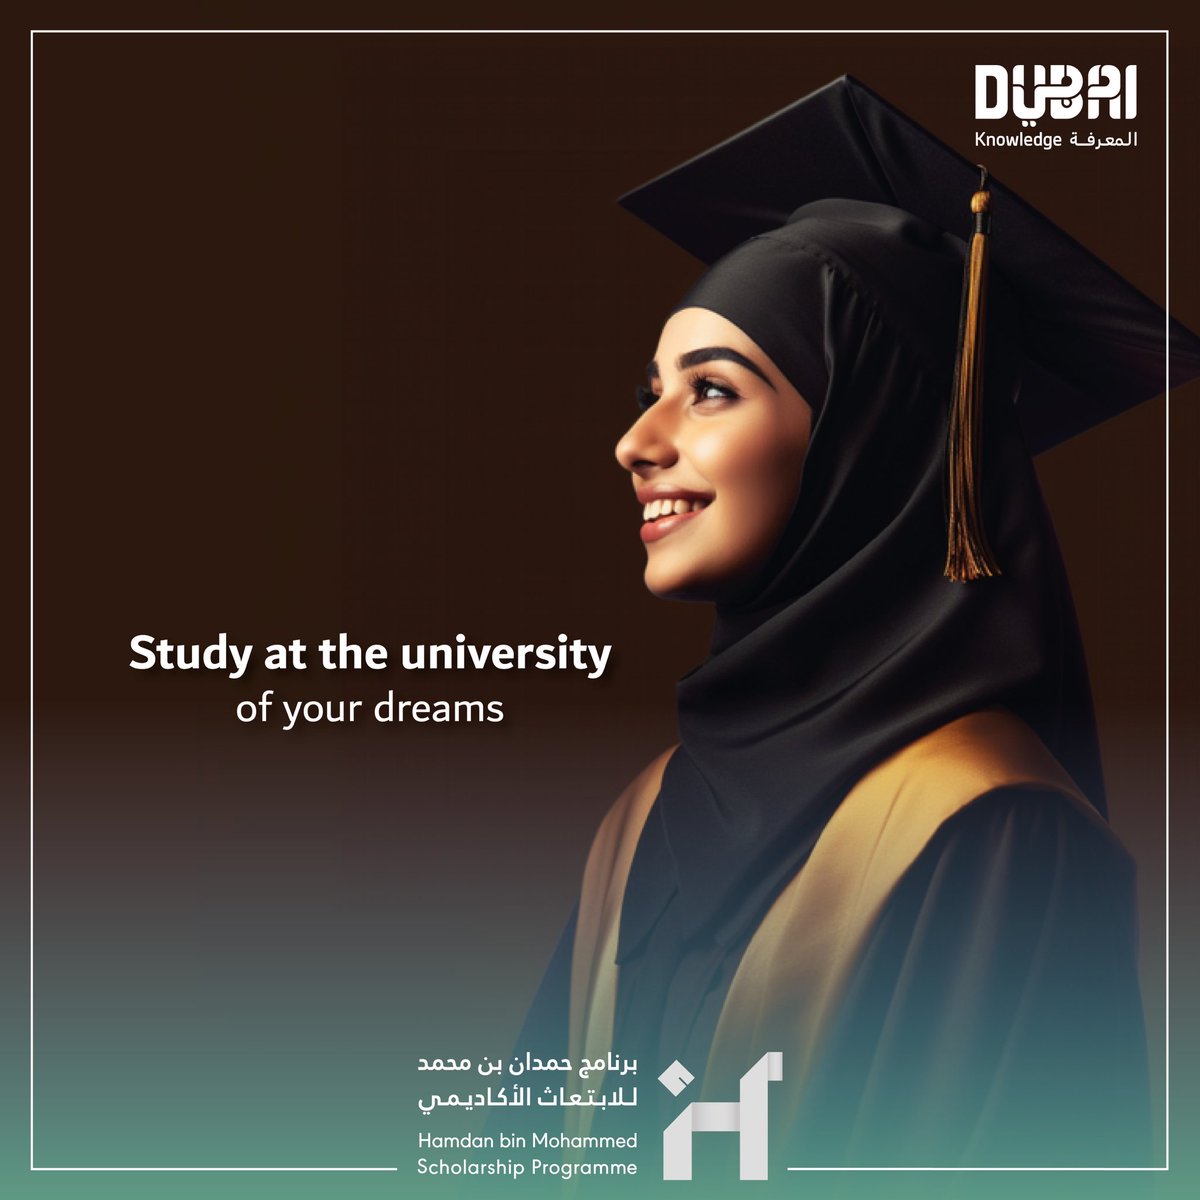 Emirati students: This is your chance to pursue your dreams of studying at the best universities in the world. Applications are now open for the Hamdan bin Mohammed Scholarship Programme. Visit the “Emirati” section on the Dubai Now app to apply. @DigitalDubai